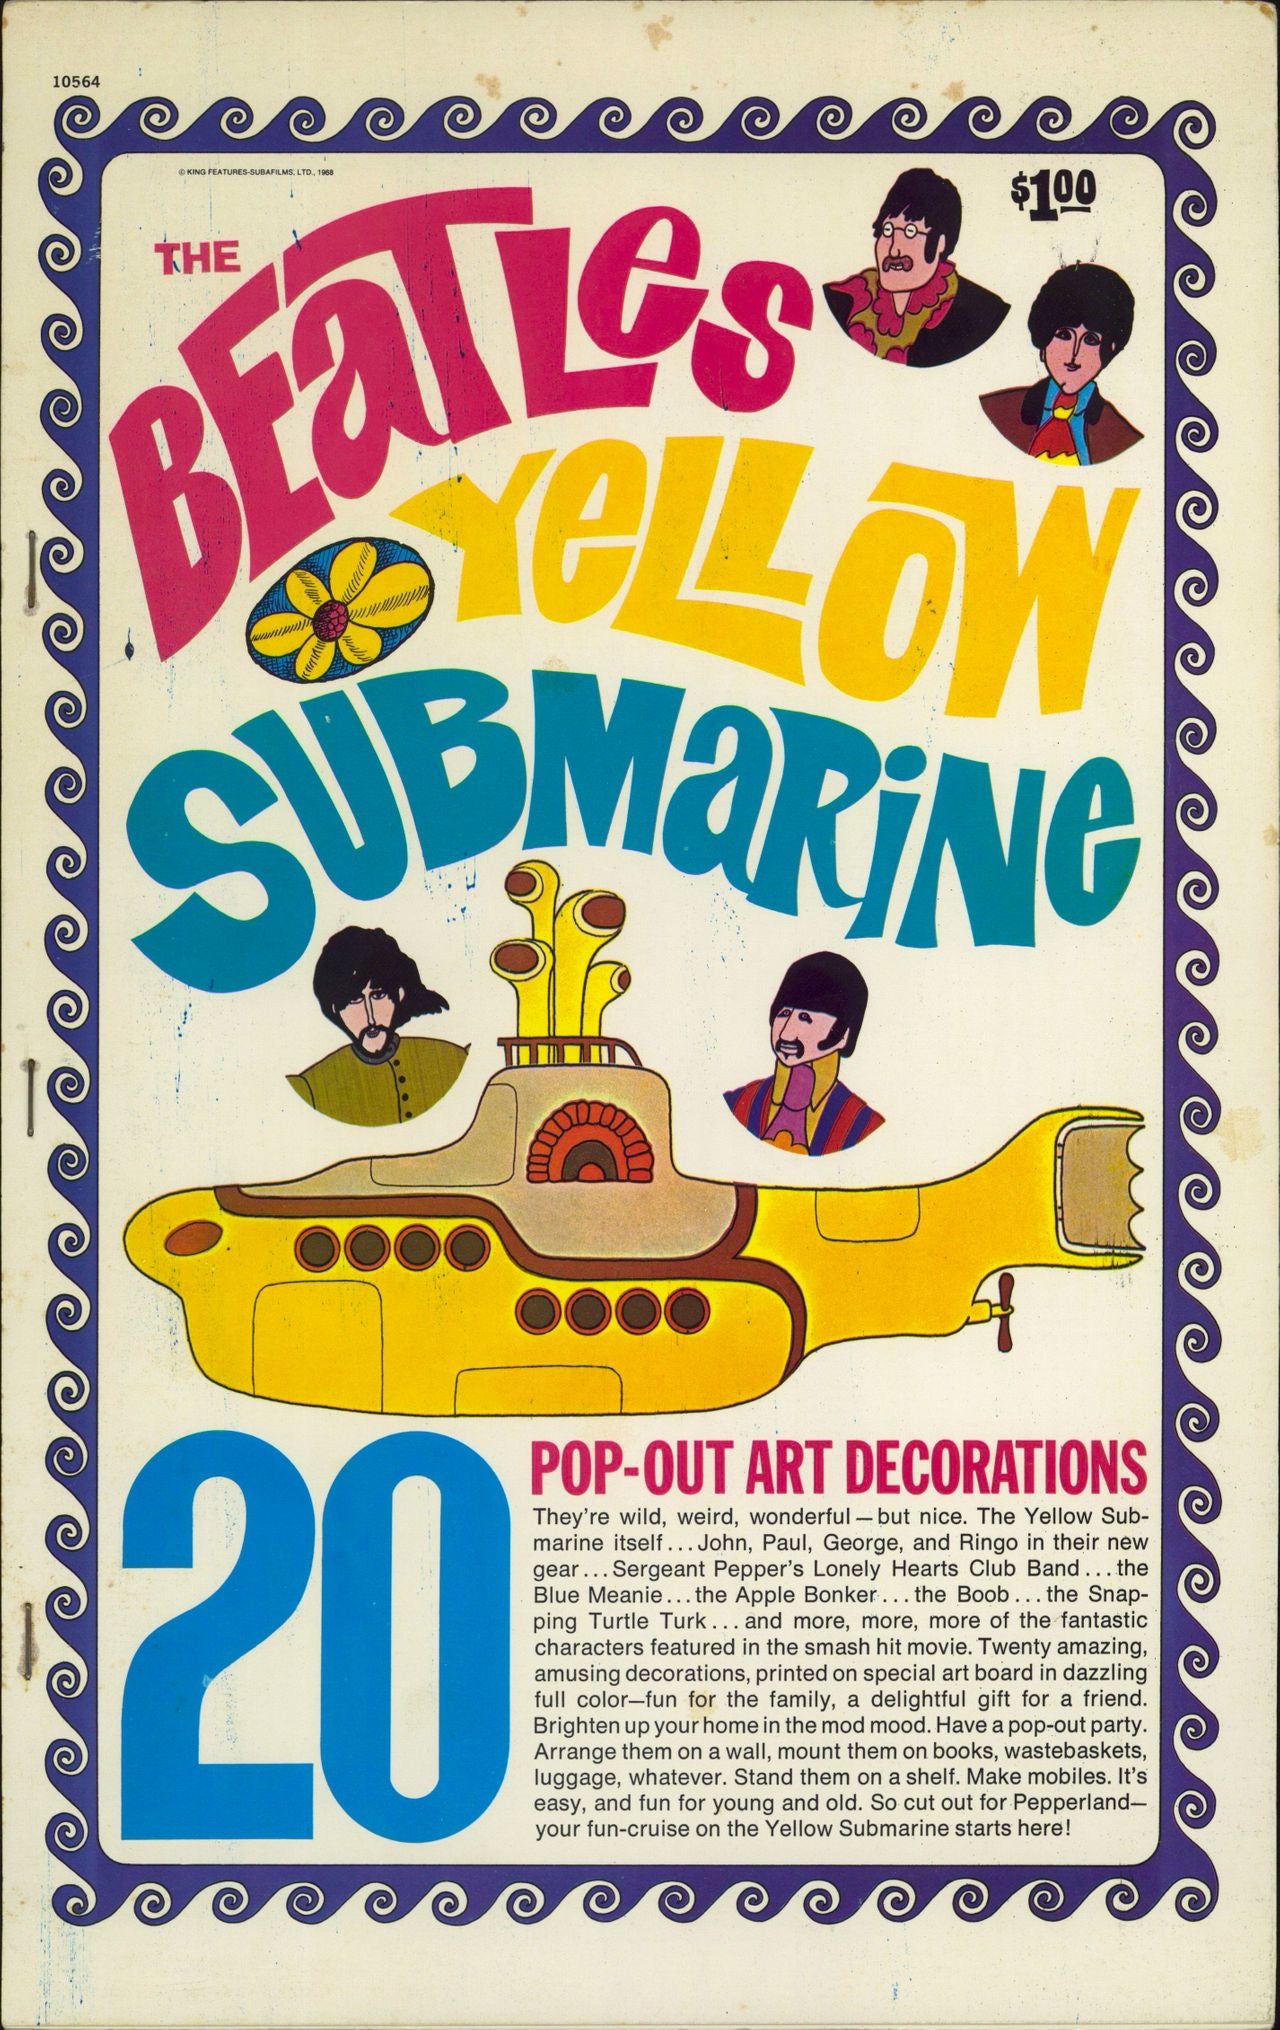 The Beatles The Beatles Yellow Submarine Pop-Out Art Decorations US Book